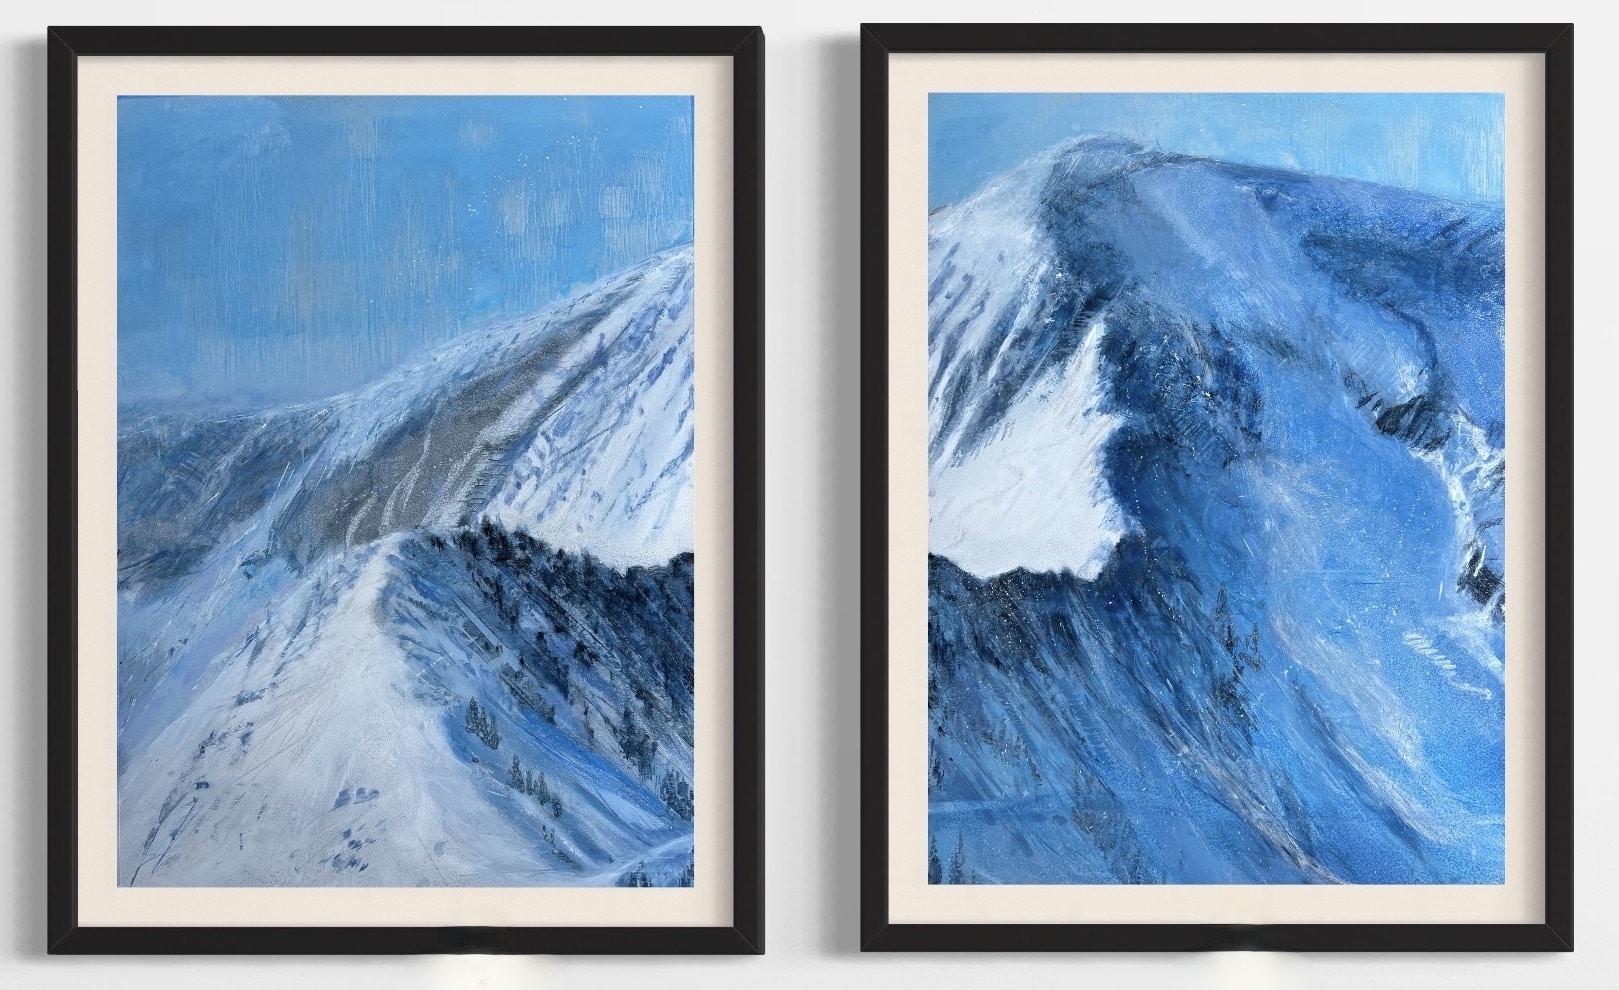 A pair of contemporary mountain oil paintings on metal panels by artist Cynthia McLoughlin of the iconic ridgeline at Snowbird in the Wasatch Mountains.